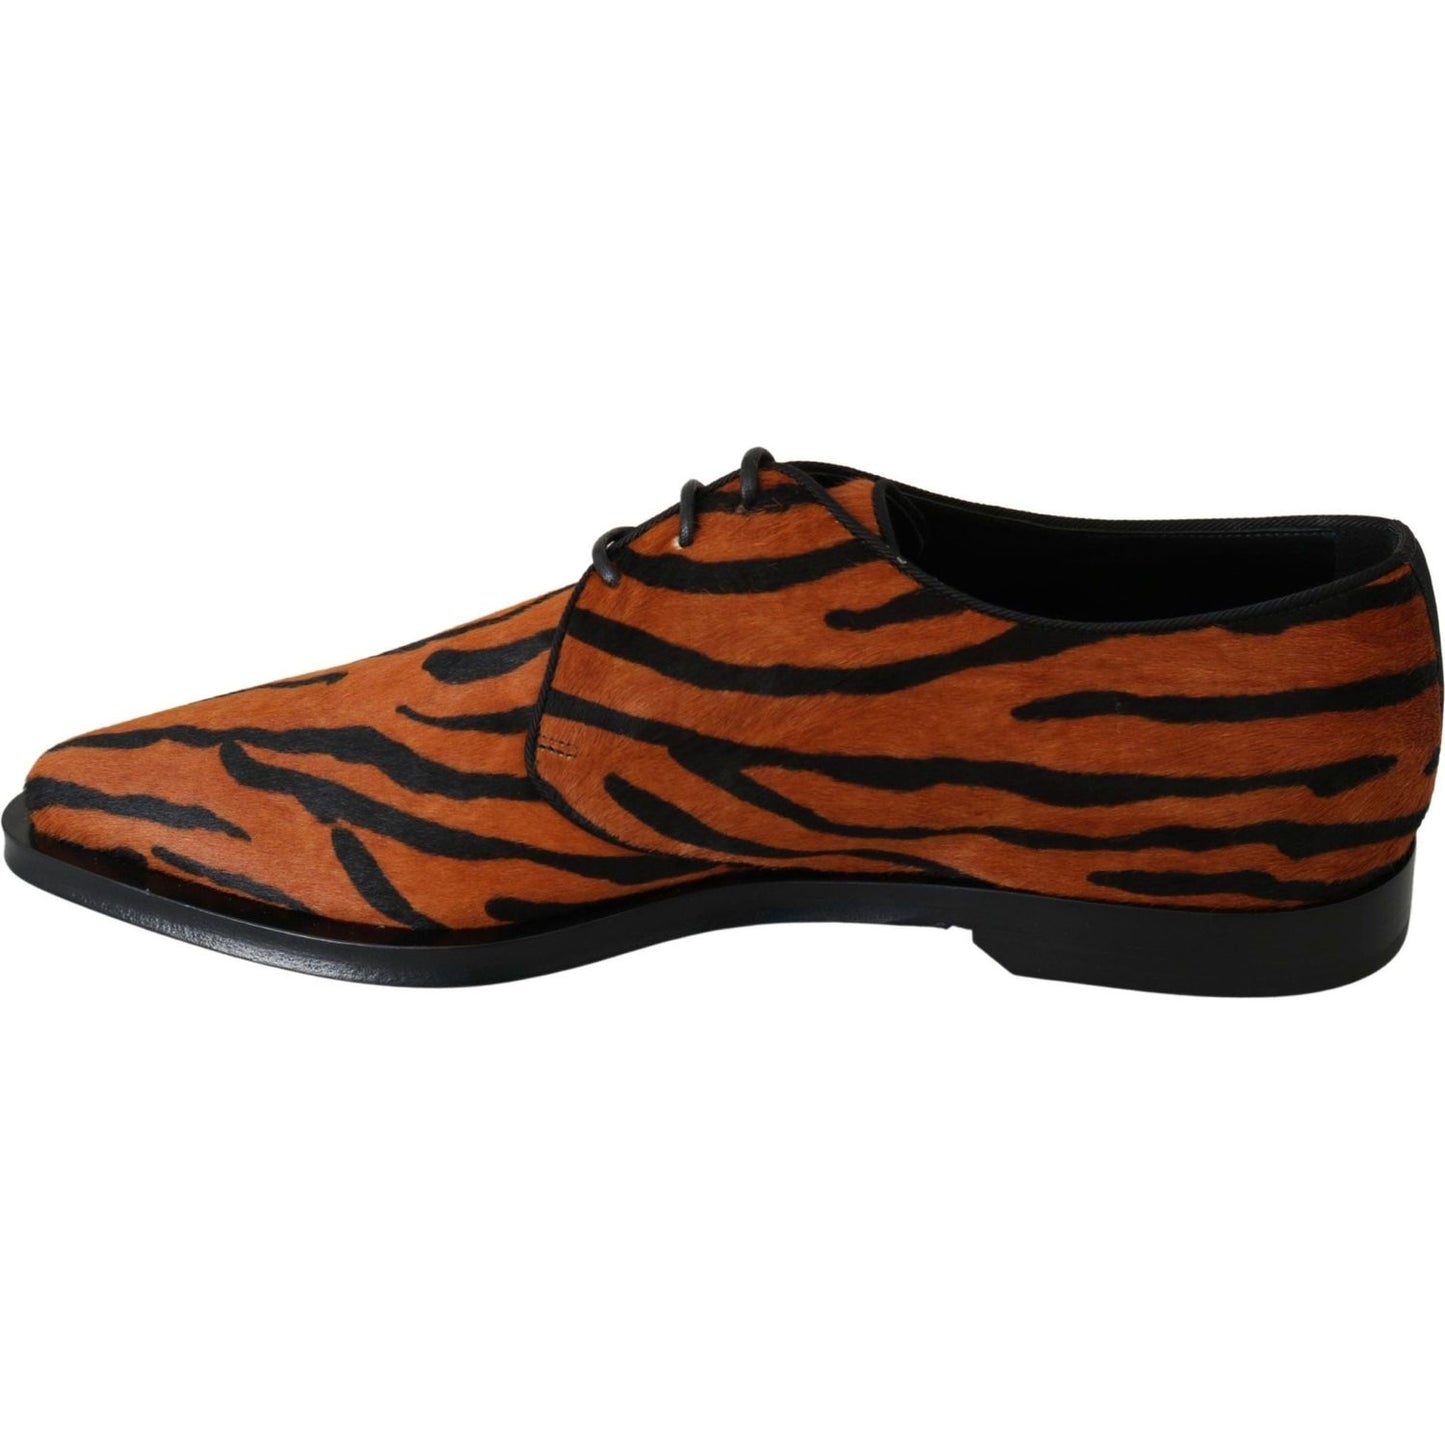 Dolce & Gabbana Tiger Pattern Dress Shoes with Pony Hair orange-pony-hair-formal-dress-broque-shoes-1 IMG_1608-scaled-6d28ff49-c97.jpg